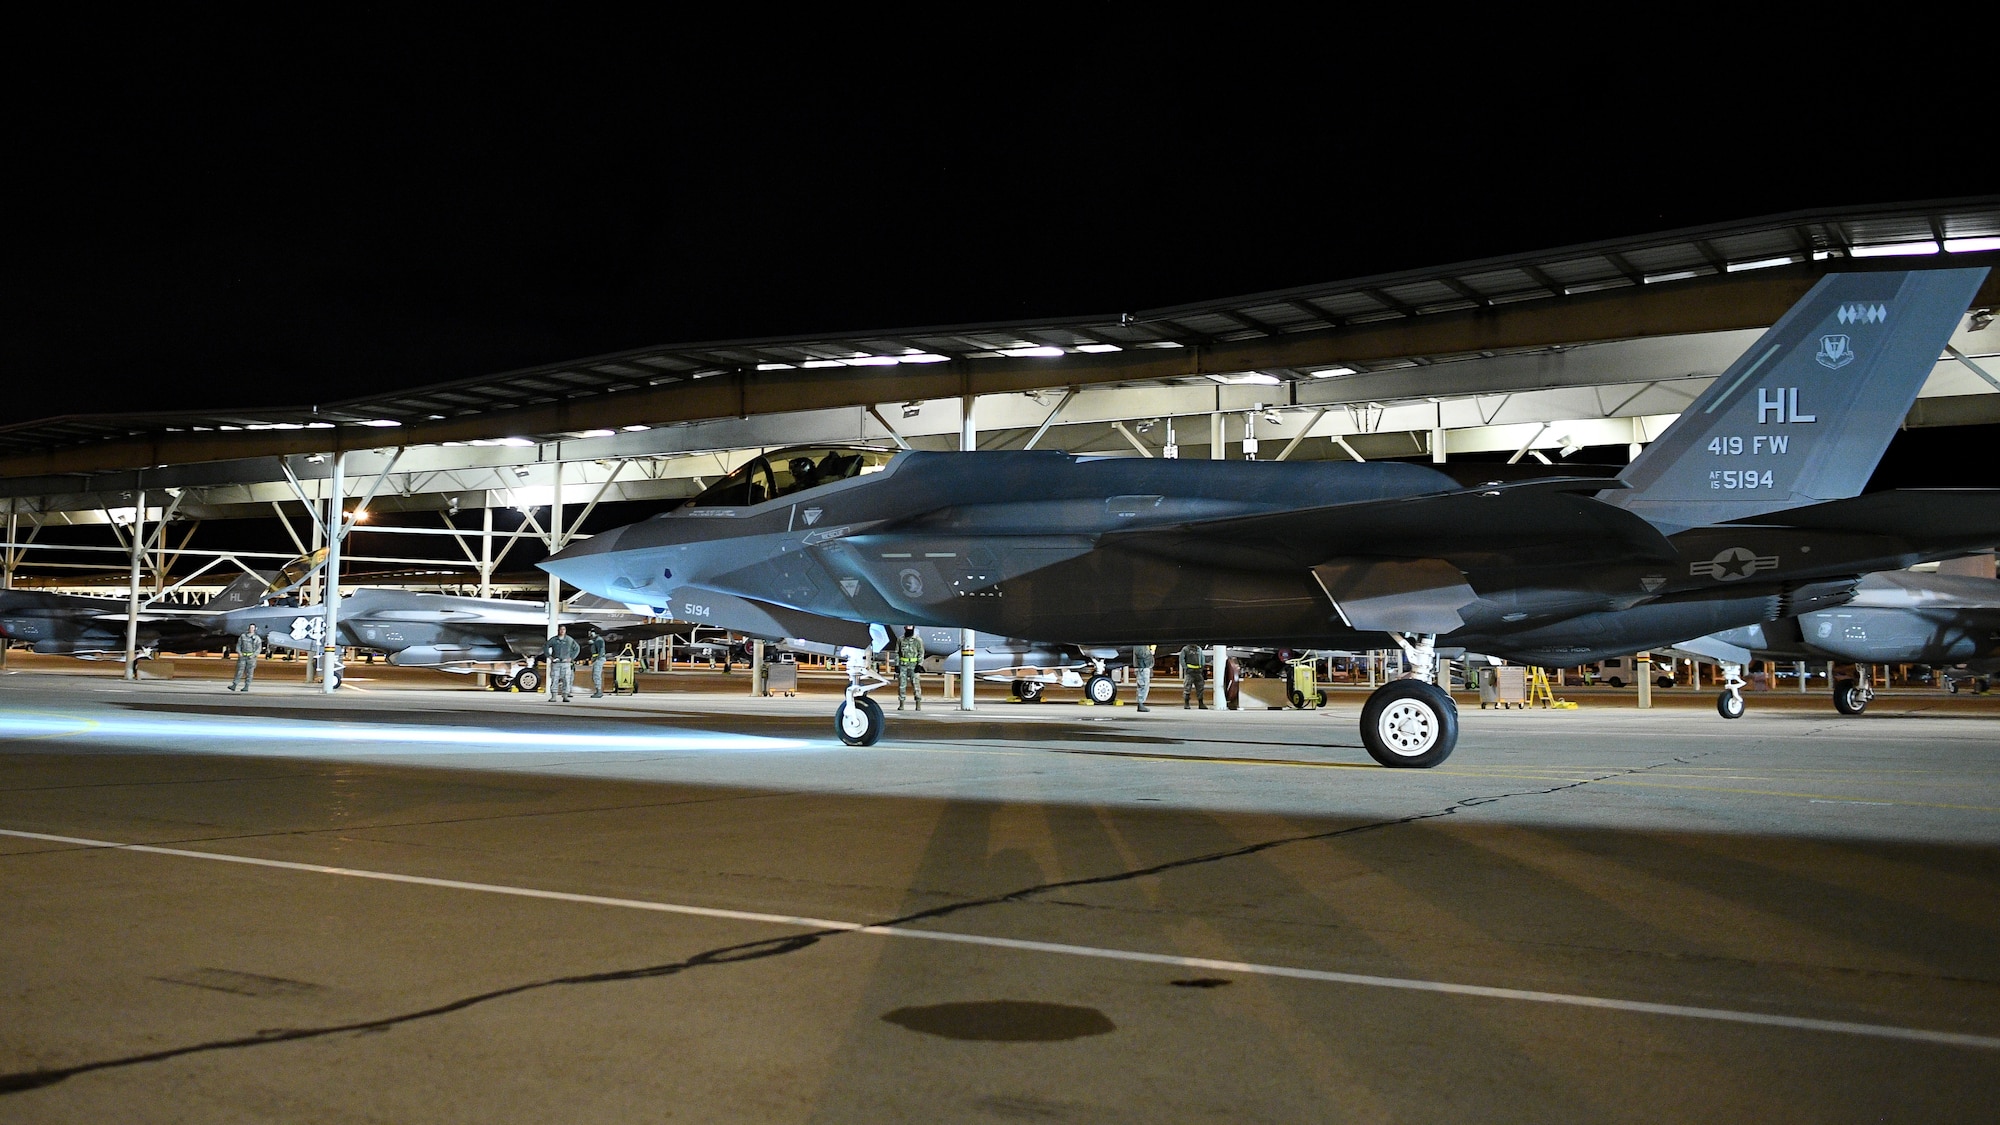 An F-35 pilot in the 419th Fighter Wing taxis his jet into formation before a nighttime takeoff for a deployment to Al Dhafra Air Base, United Arab Emirates last week from Hill Air Force Base, Utah